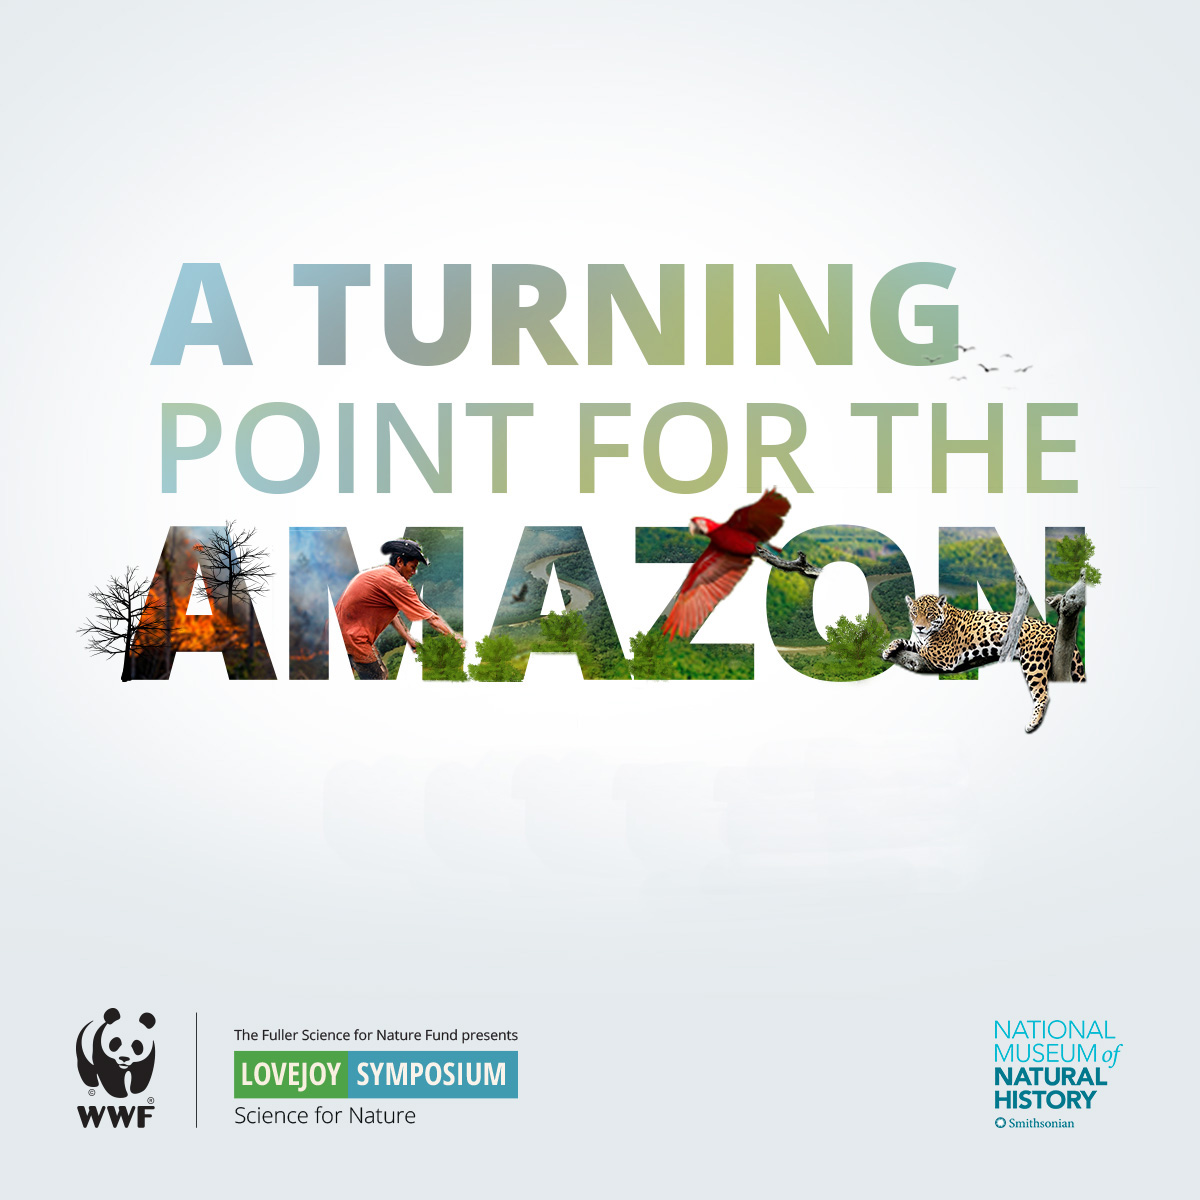 🔴 #Today
Join SPA Co-chair Marielos Peña-Claros and SPA Lead Author Mariana Varese, at #WWFLovejoy Symposium, with their discussion 'Science for and in the Amazon'.

Register for free: bit.ly/3LeXEux
Event available in English, Spanish, and Portuguese.
#TheAmazonWeWant